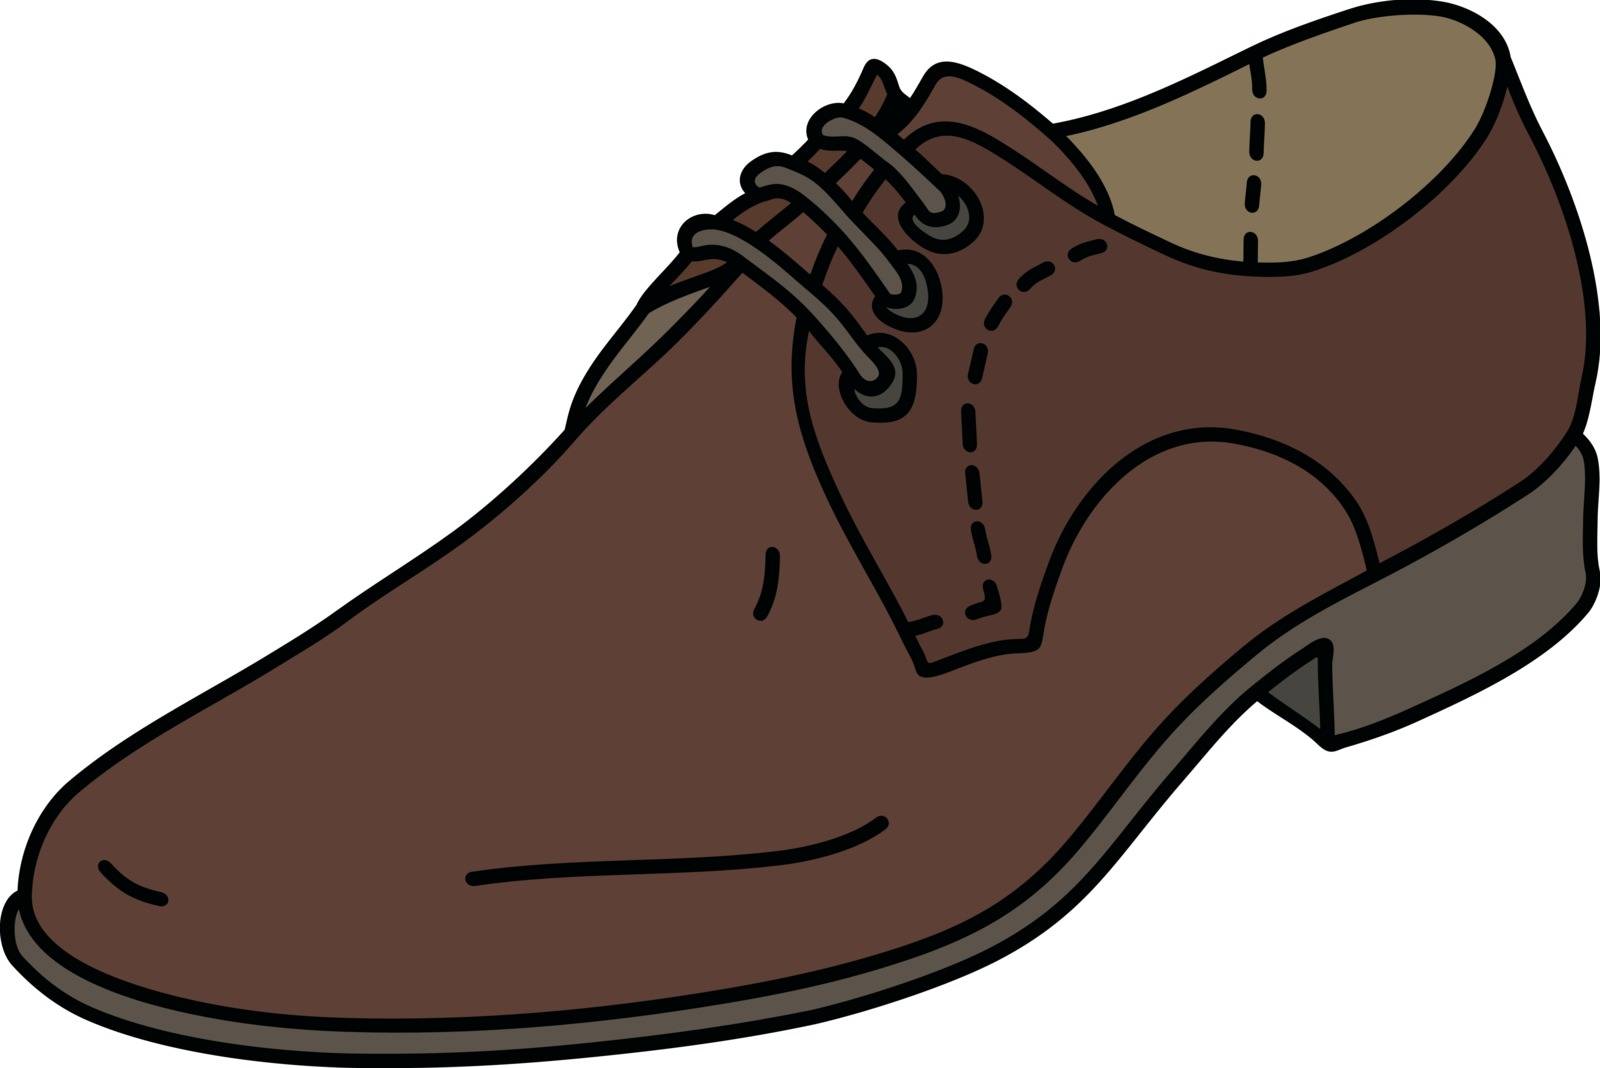 The vector illustration of a brown leather mens shoe